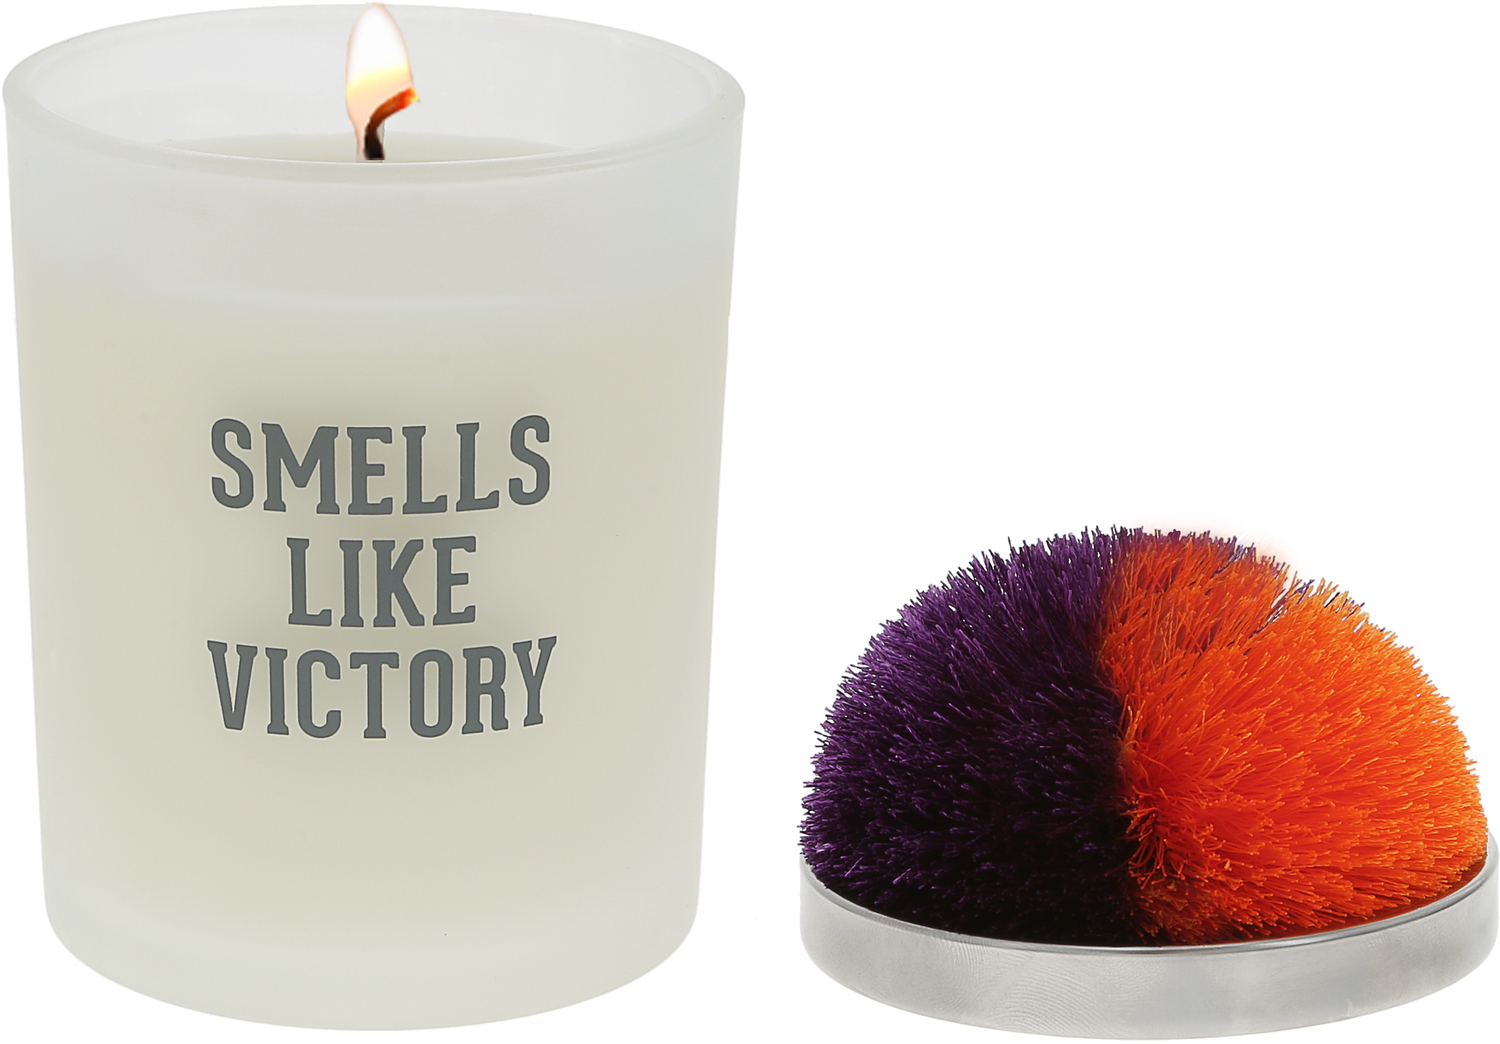 Victory - Purple & Orange by Repre-Scent - Victory - Purple & Orange - 5.5 oz - 100% Soy Wax Candle with Pom Pom Lid
Scent: Tranquility